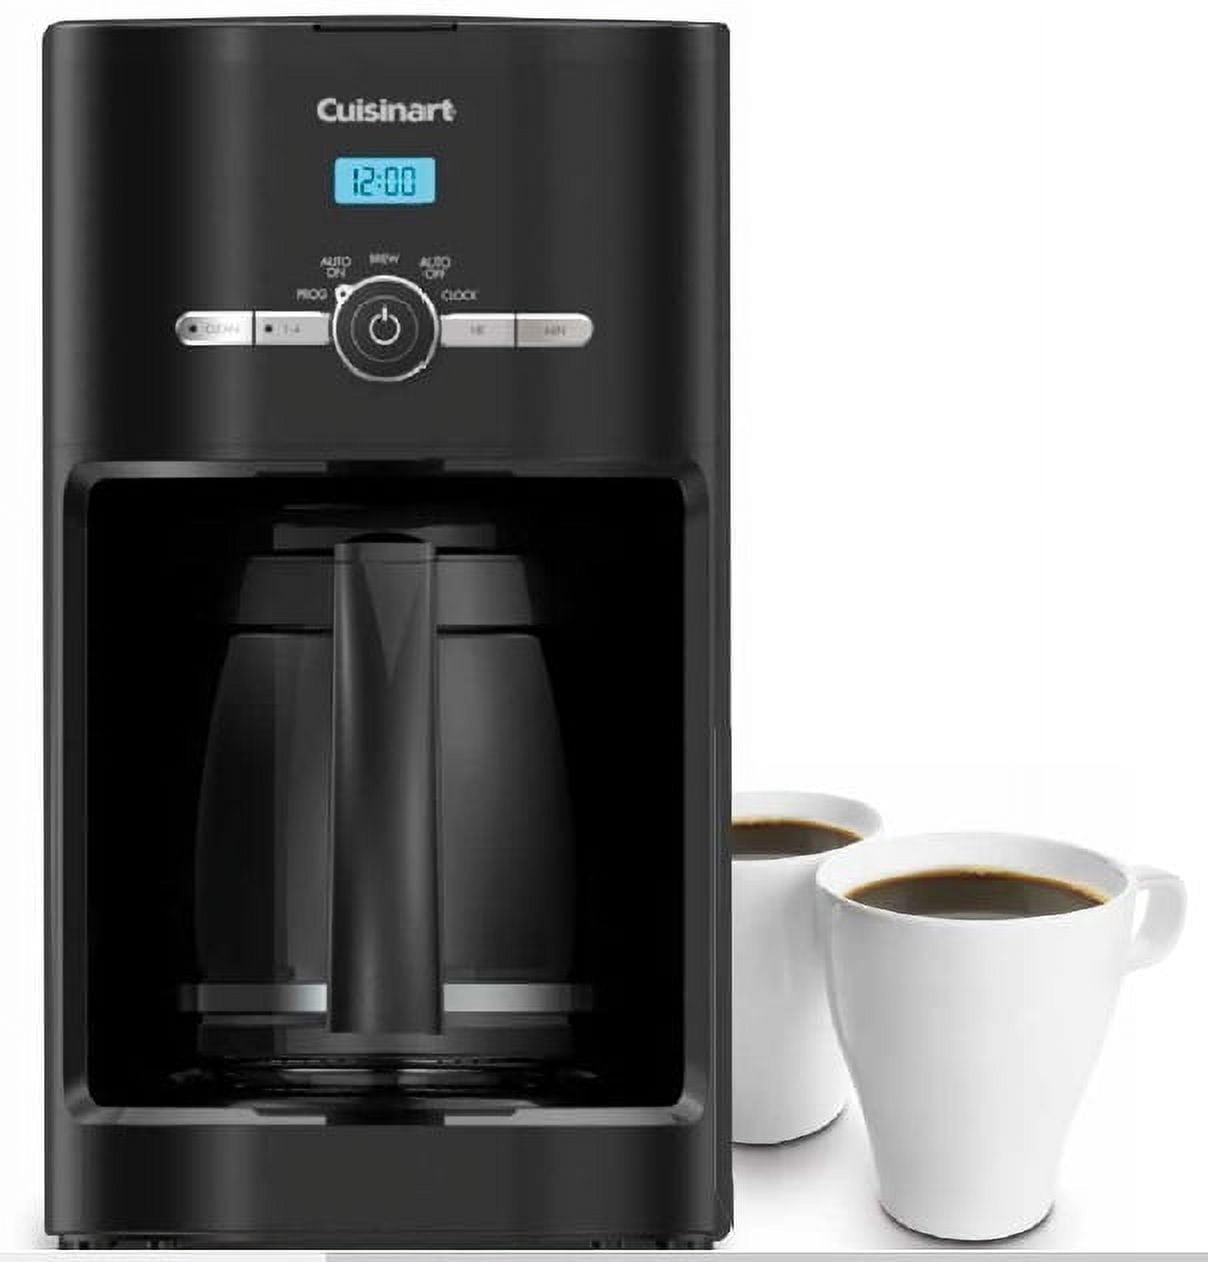 Black 12-Cup Programmable Coffee Maker